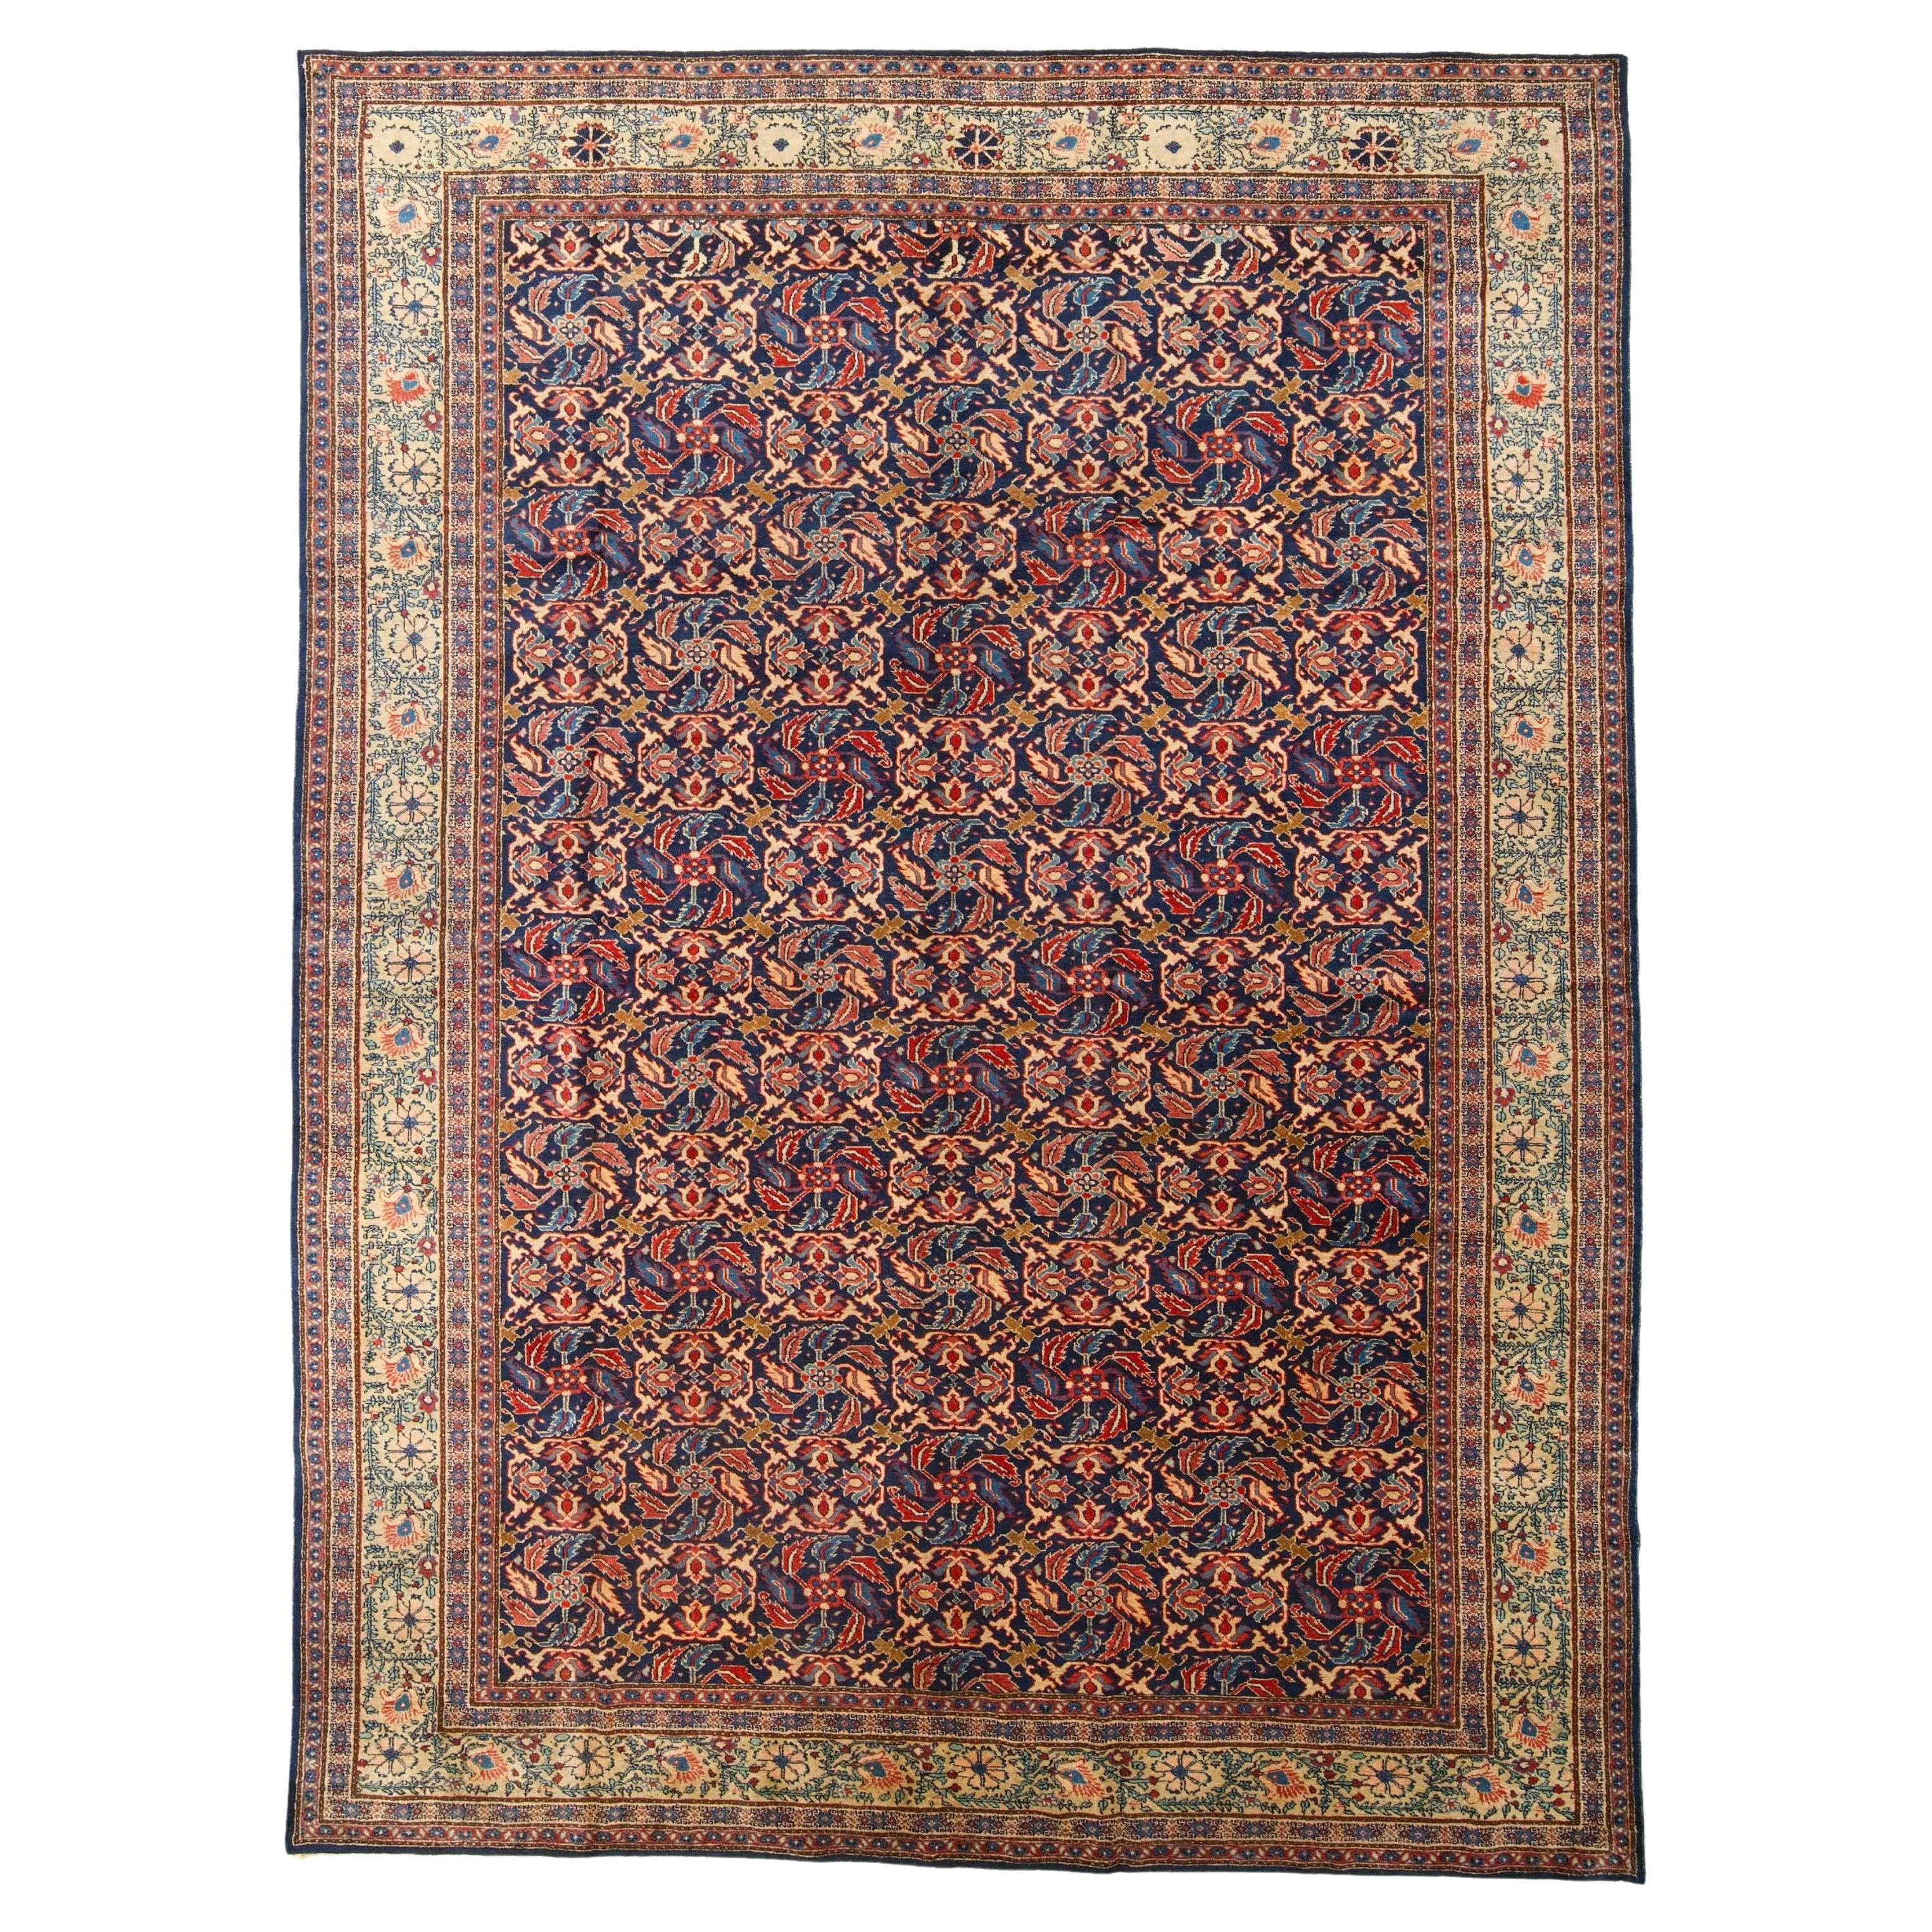 Antique Ferahan Rug - Late 19th Century Ferahan Carpet in Good Condition